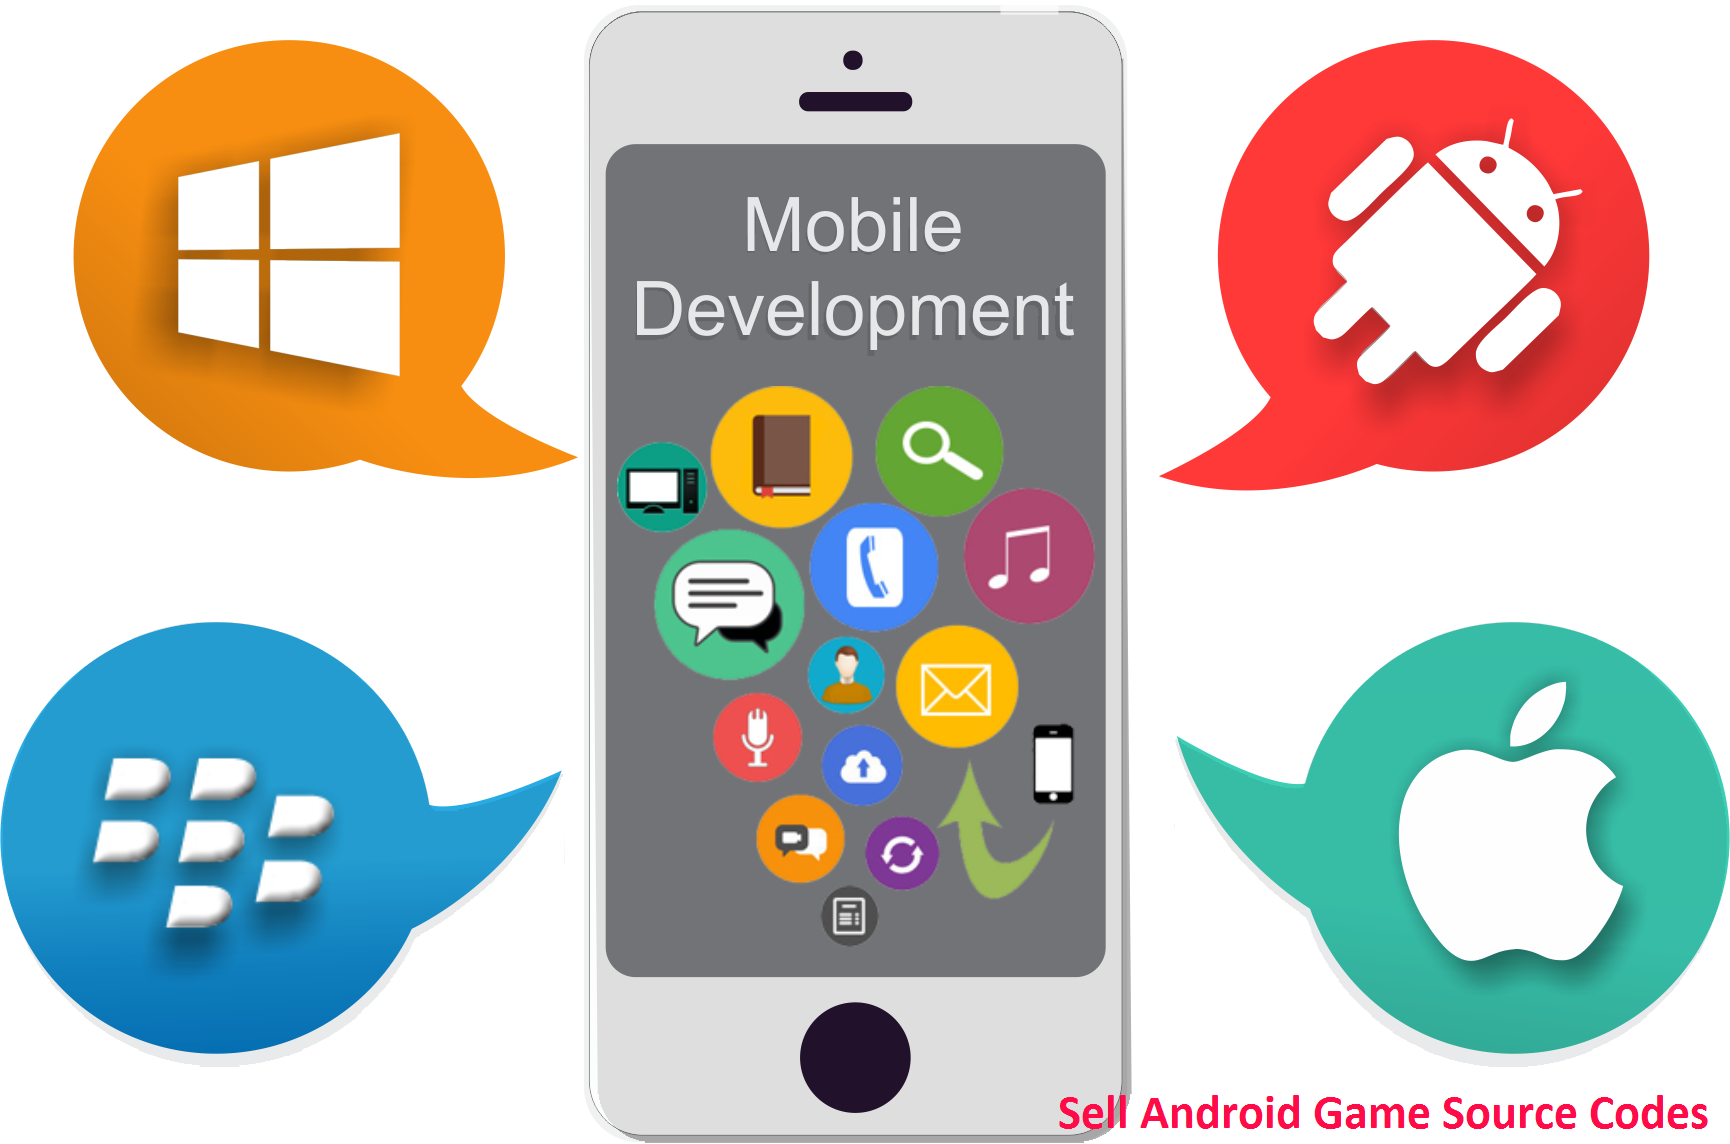 Sell Android Game Source Codes